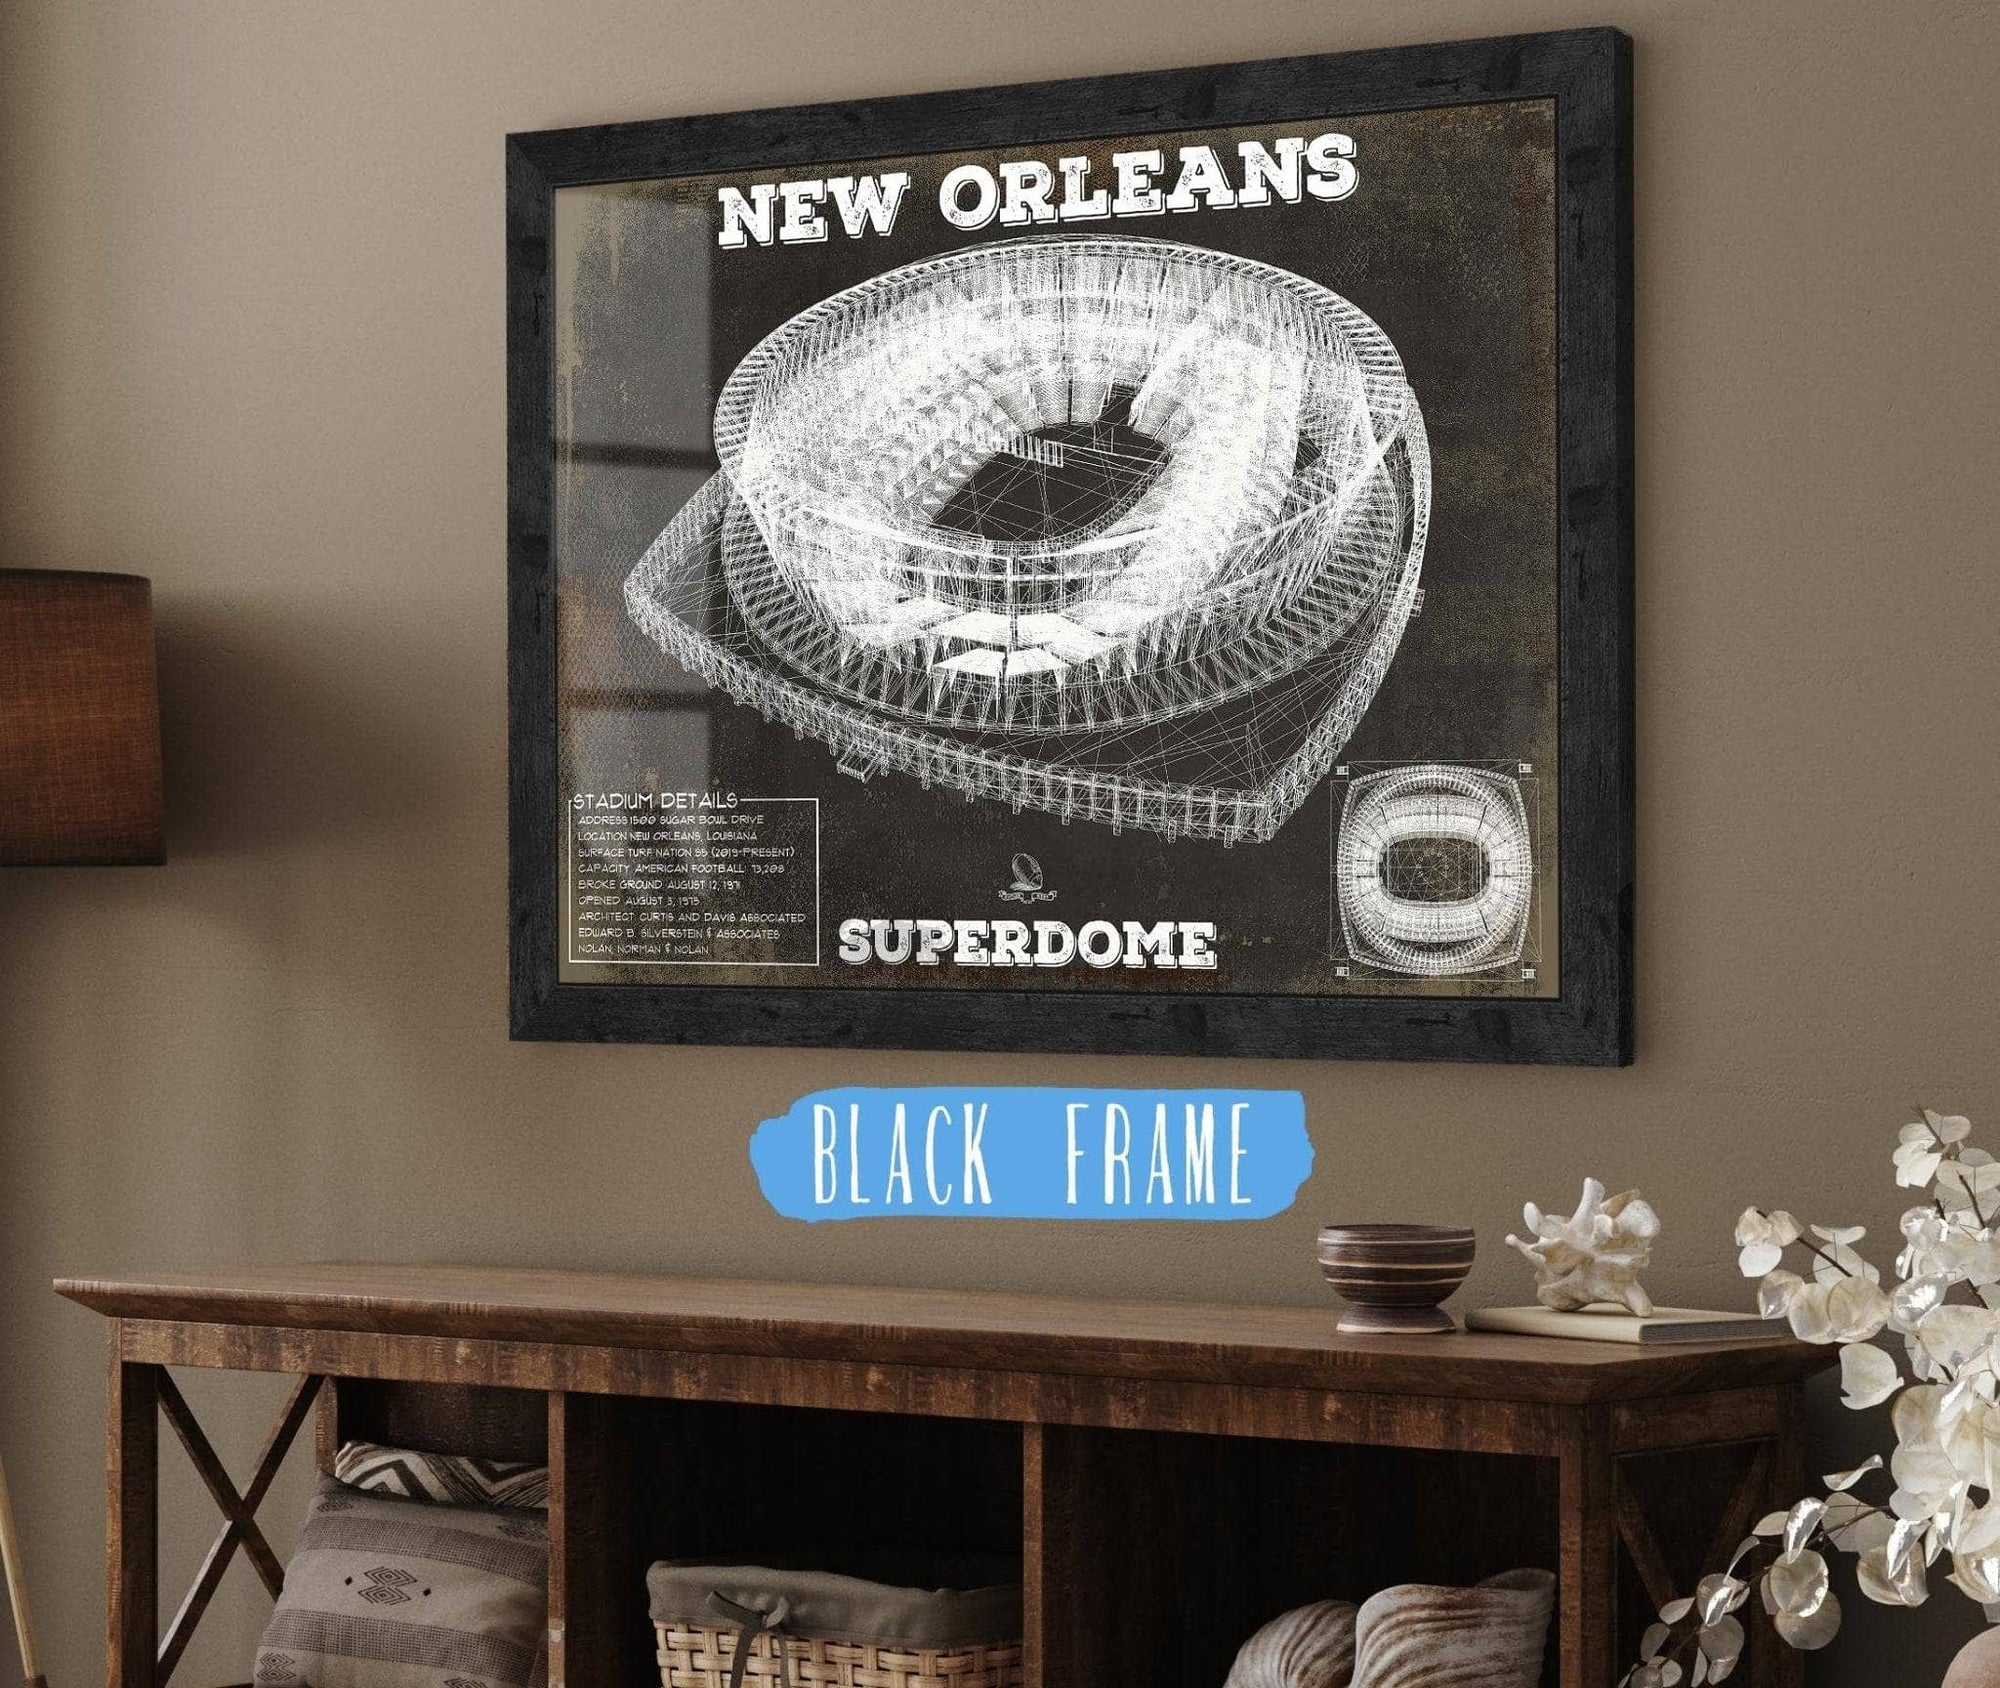 Cutler West Pro Football Collection 14" x 11" / Black Frame New Orleans Saints Superdome Seating Chart - Vintage Football Print 734084112-TOP